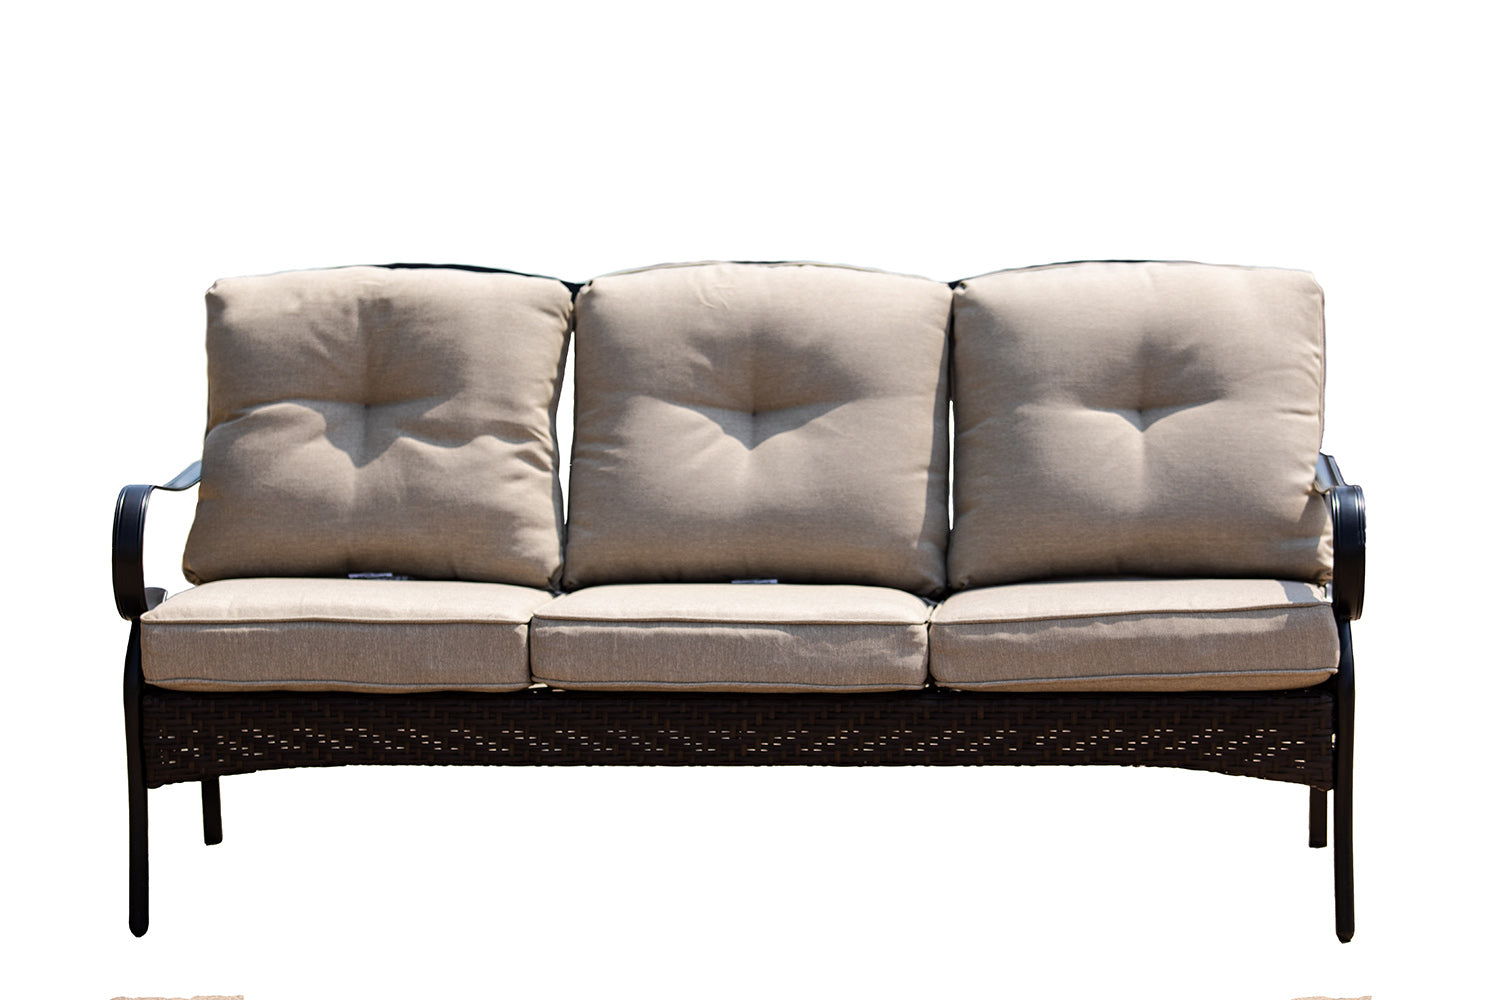 69" Beige Polyester Blend And Black Sofa